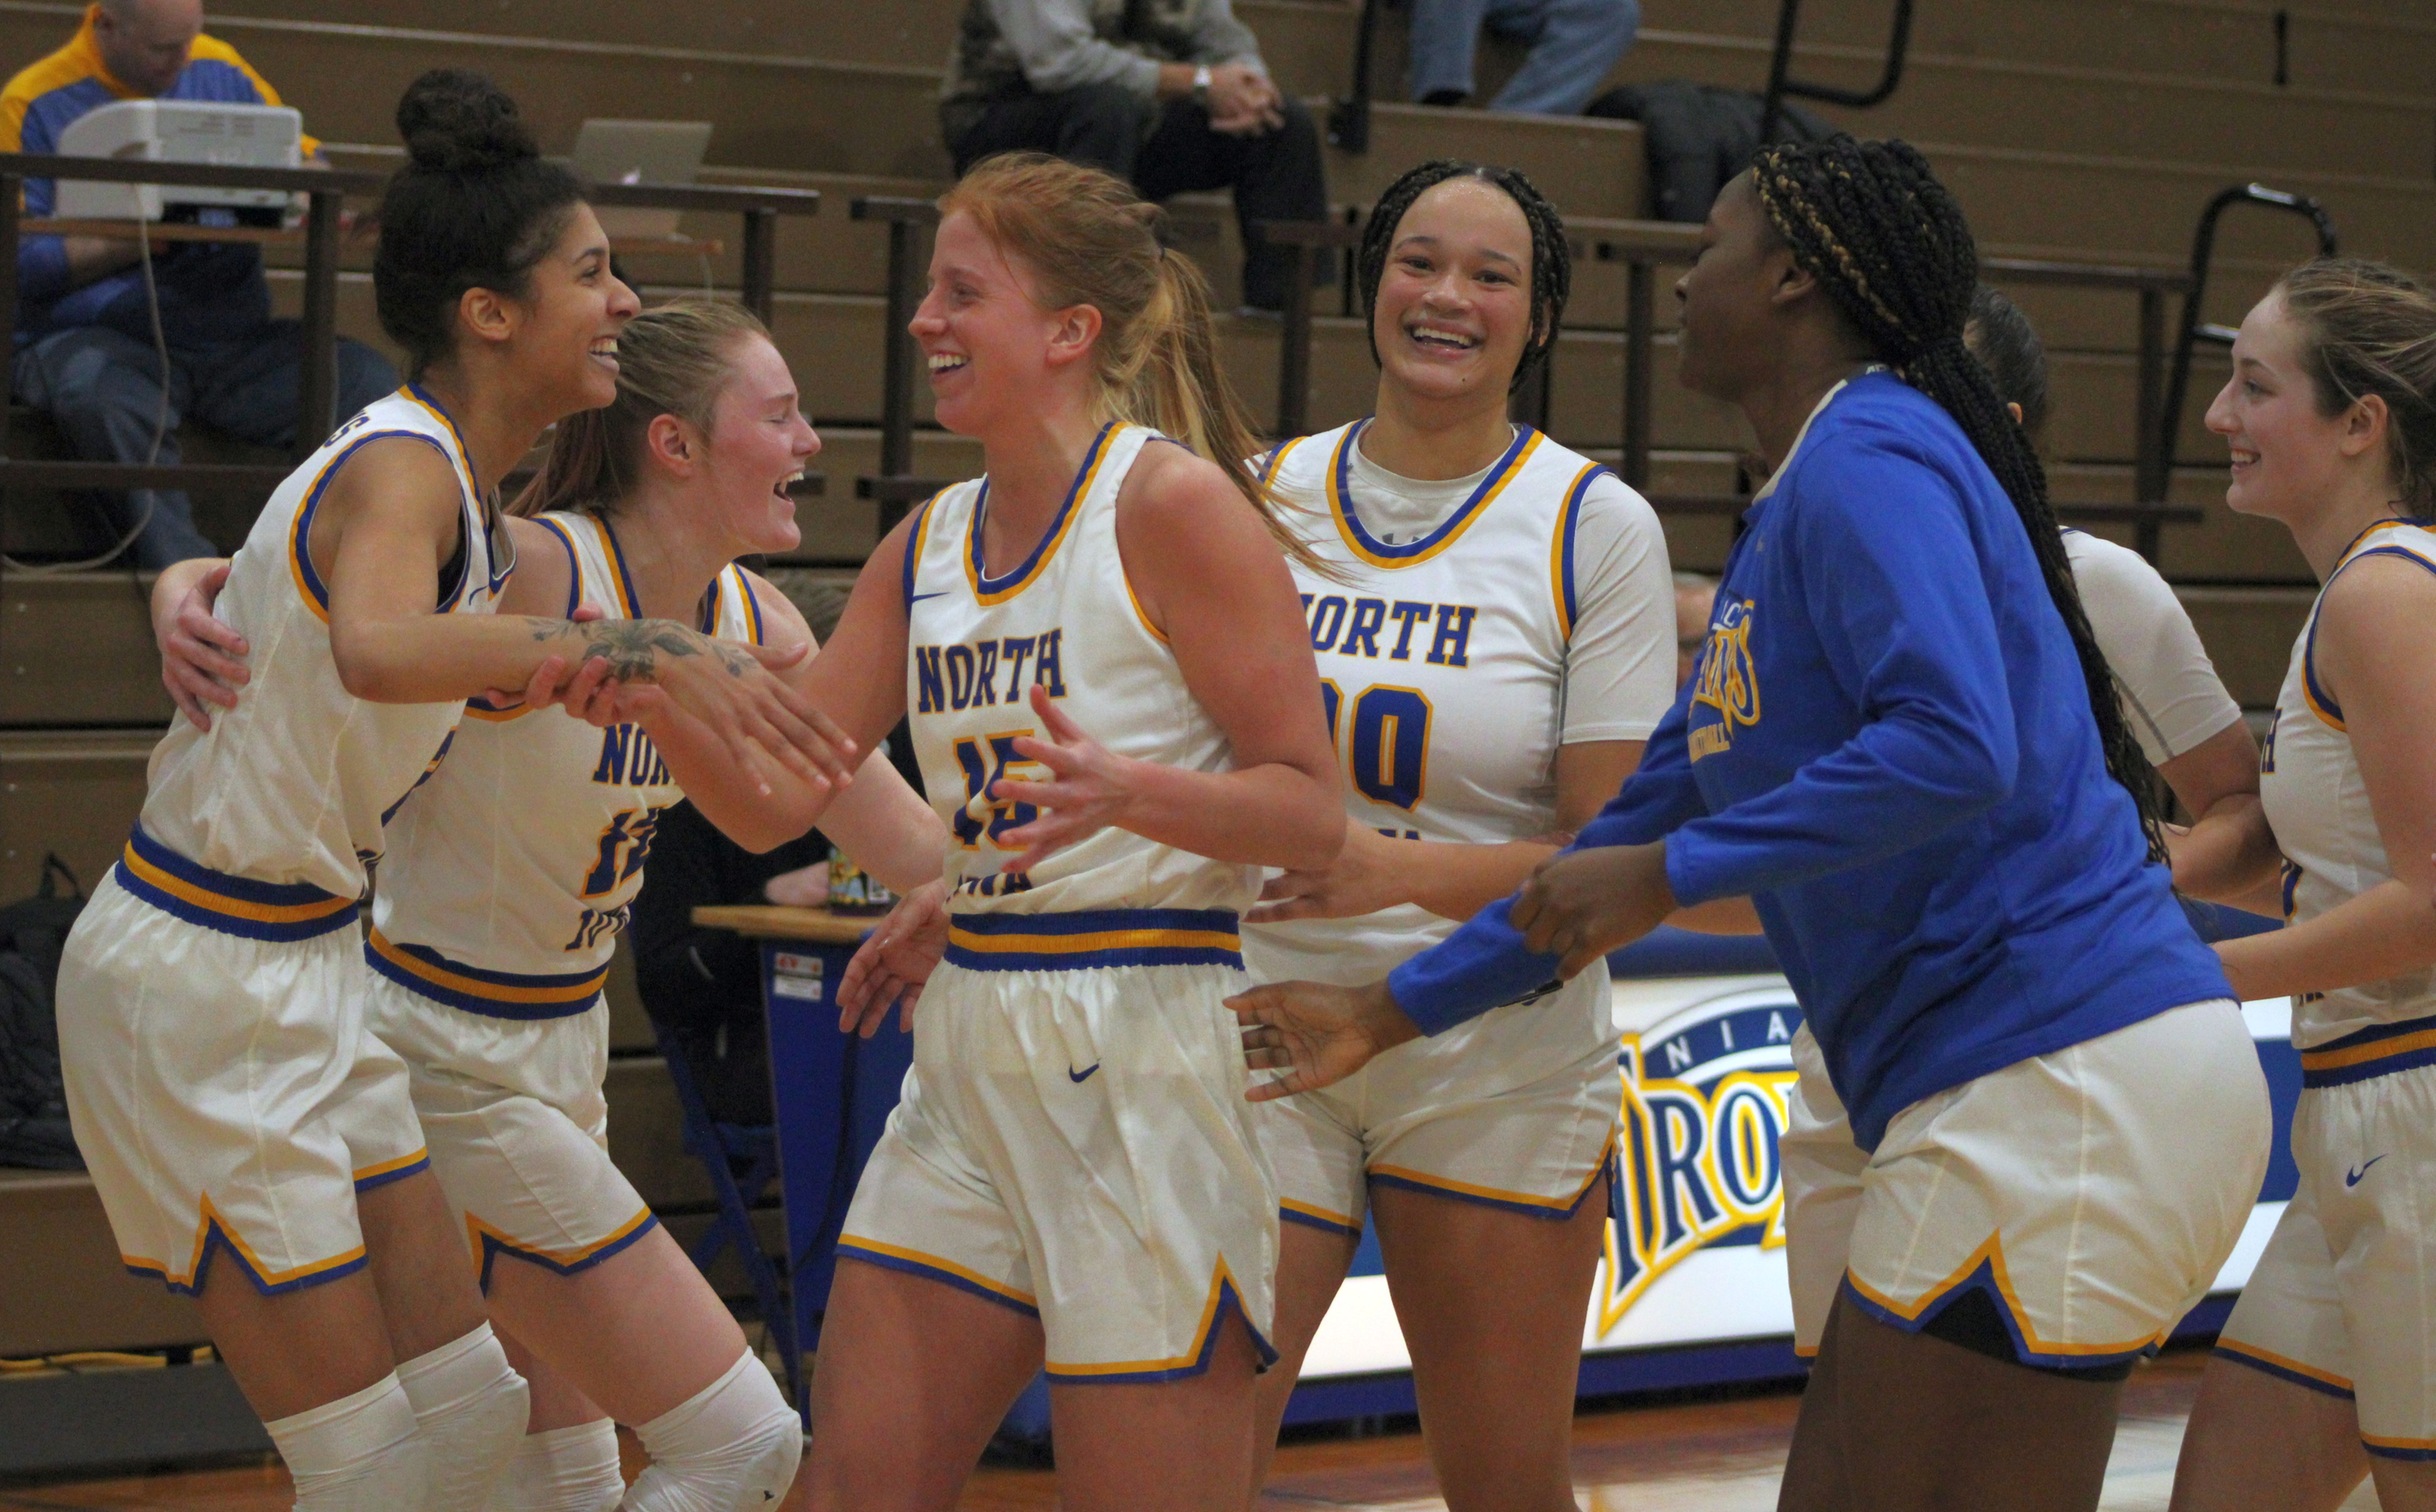 The NIACC women's basketball team celebrates after knocking off No. 6 Iowa Western 59-54 Wednesday in the NIACC gym.